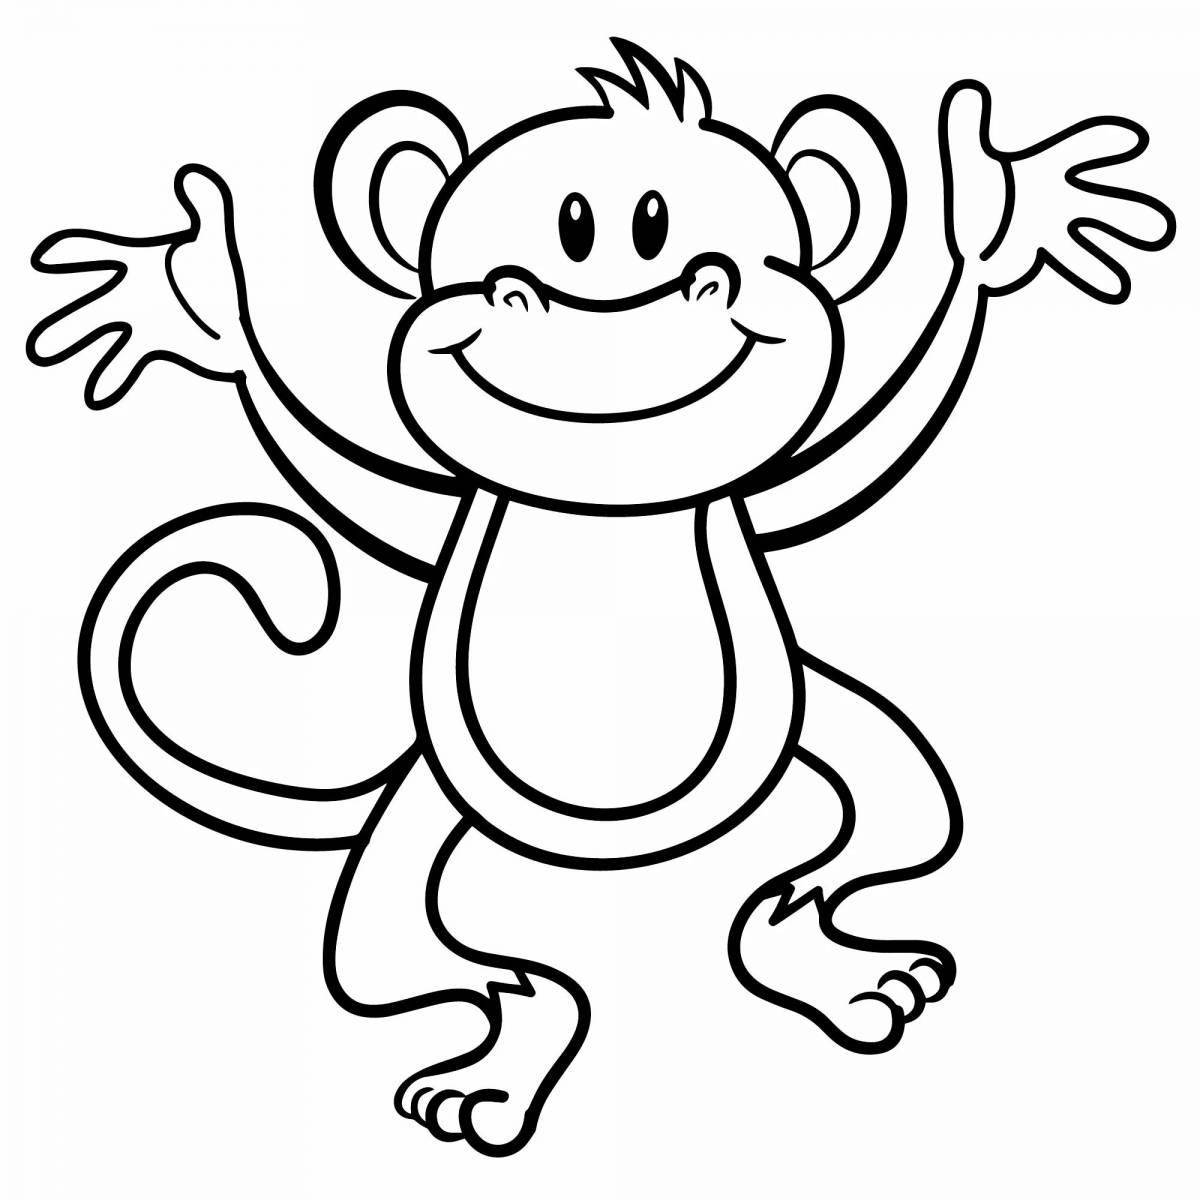 Coloring monkey funny